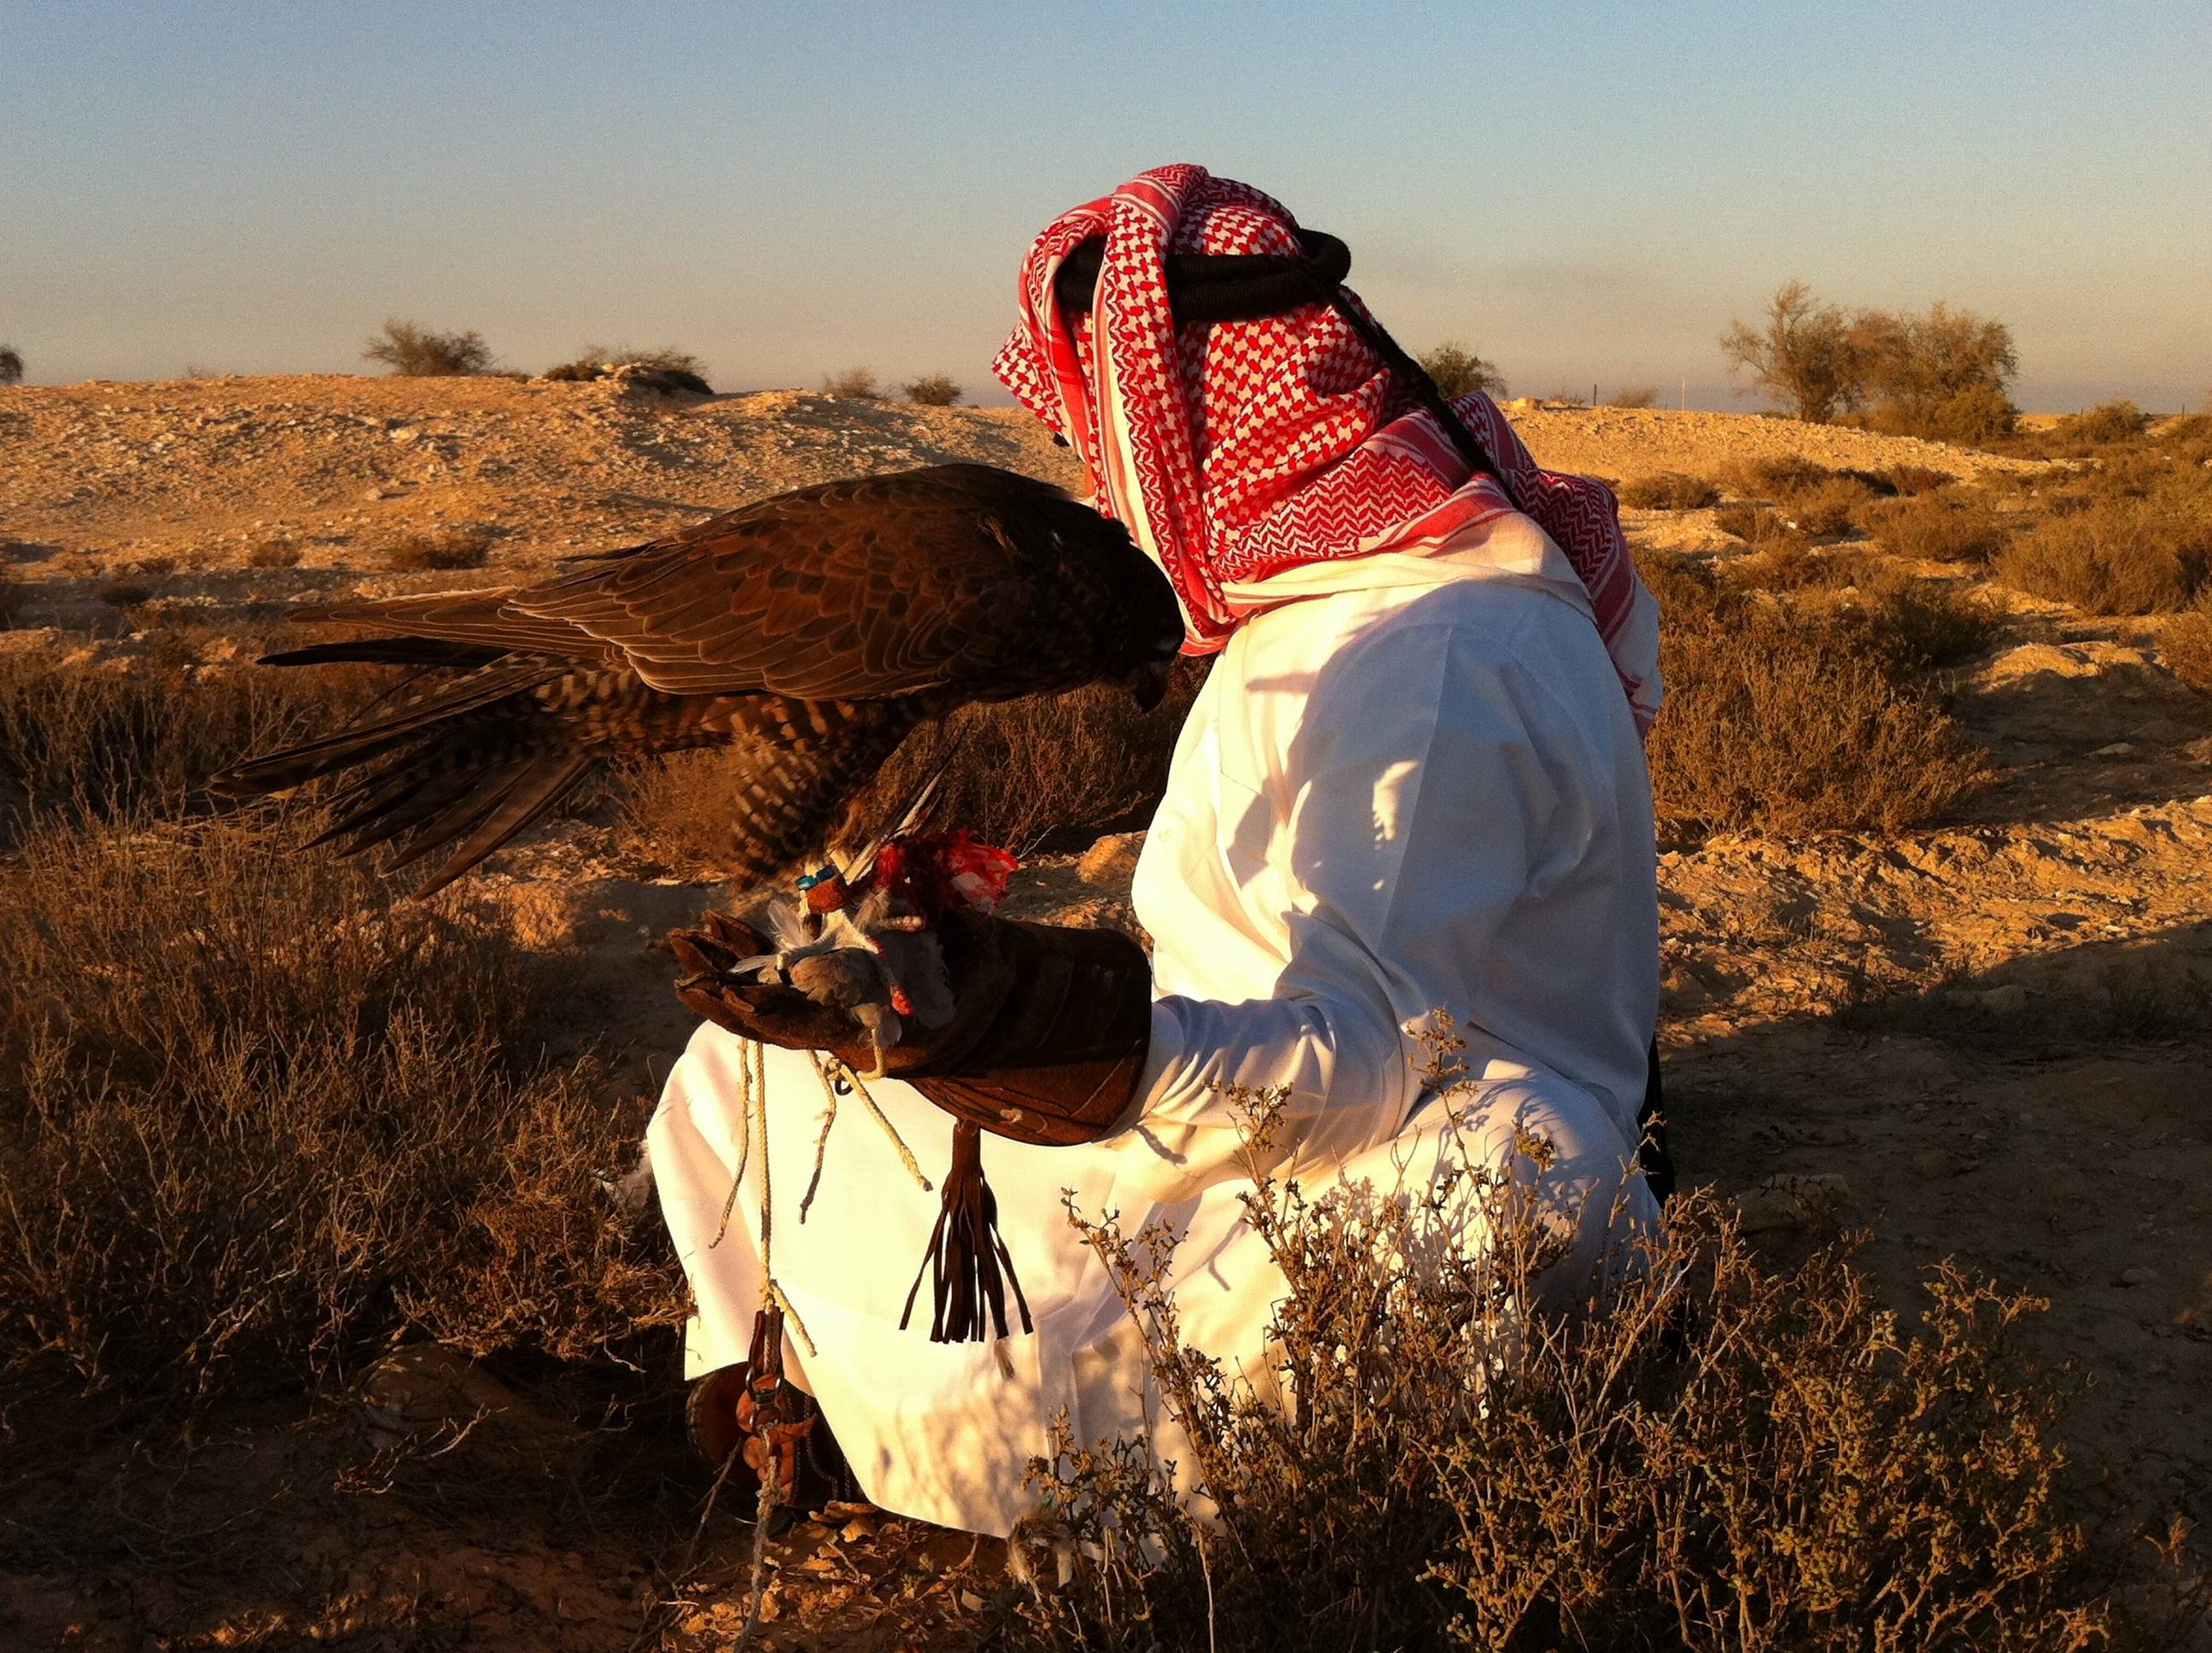 Falcon Hunting in the Middle East